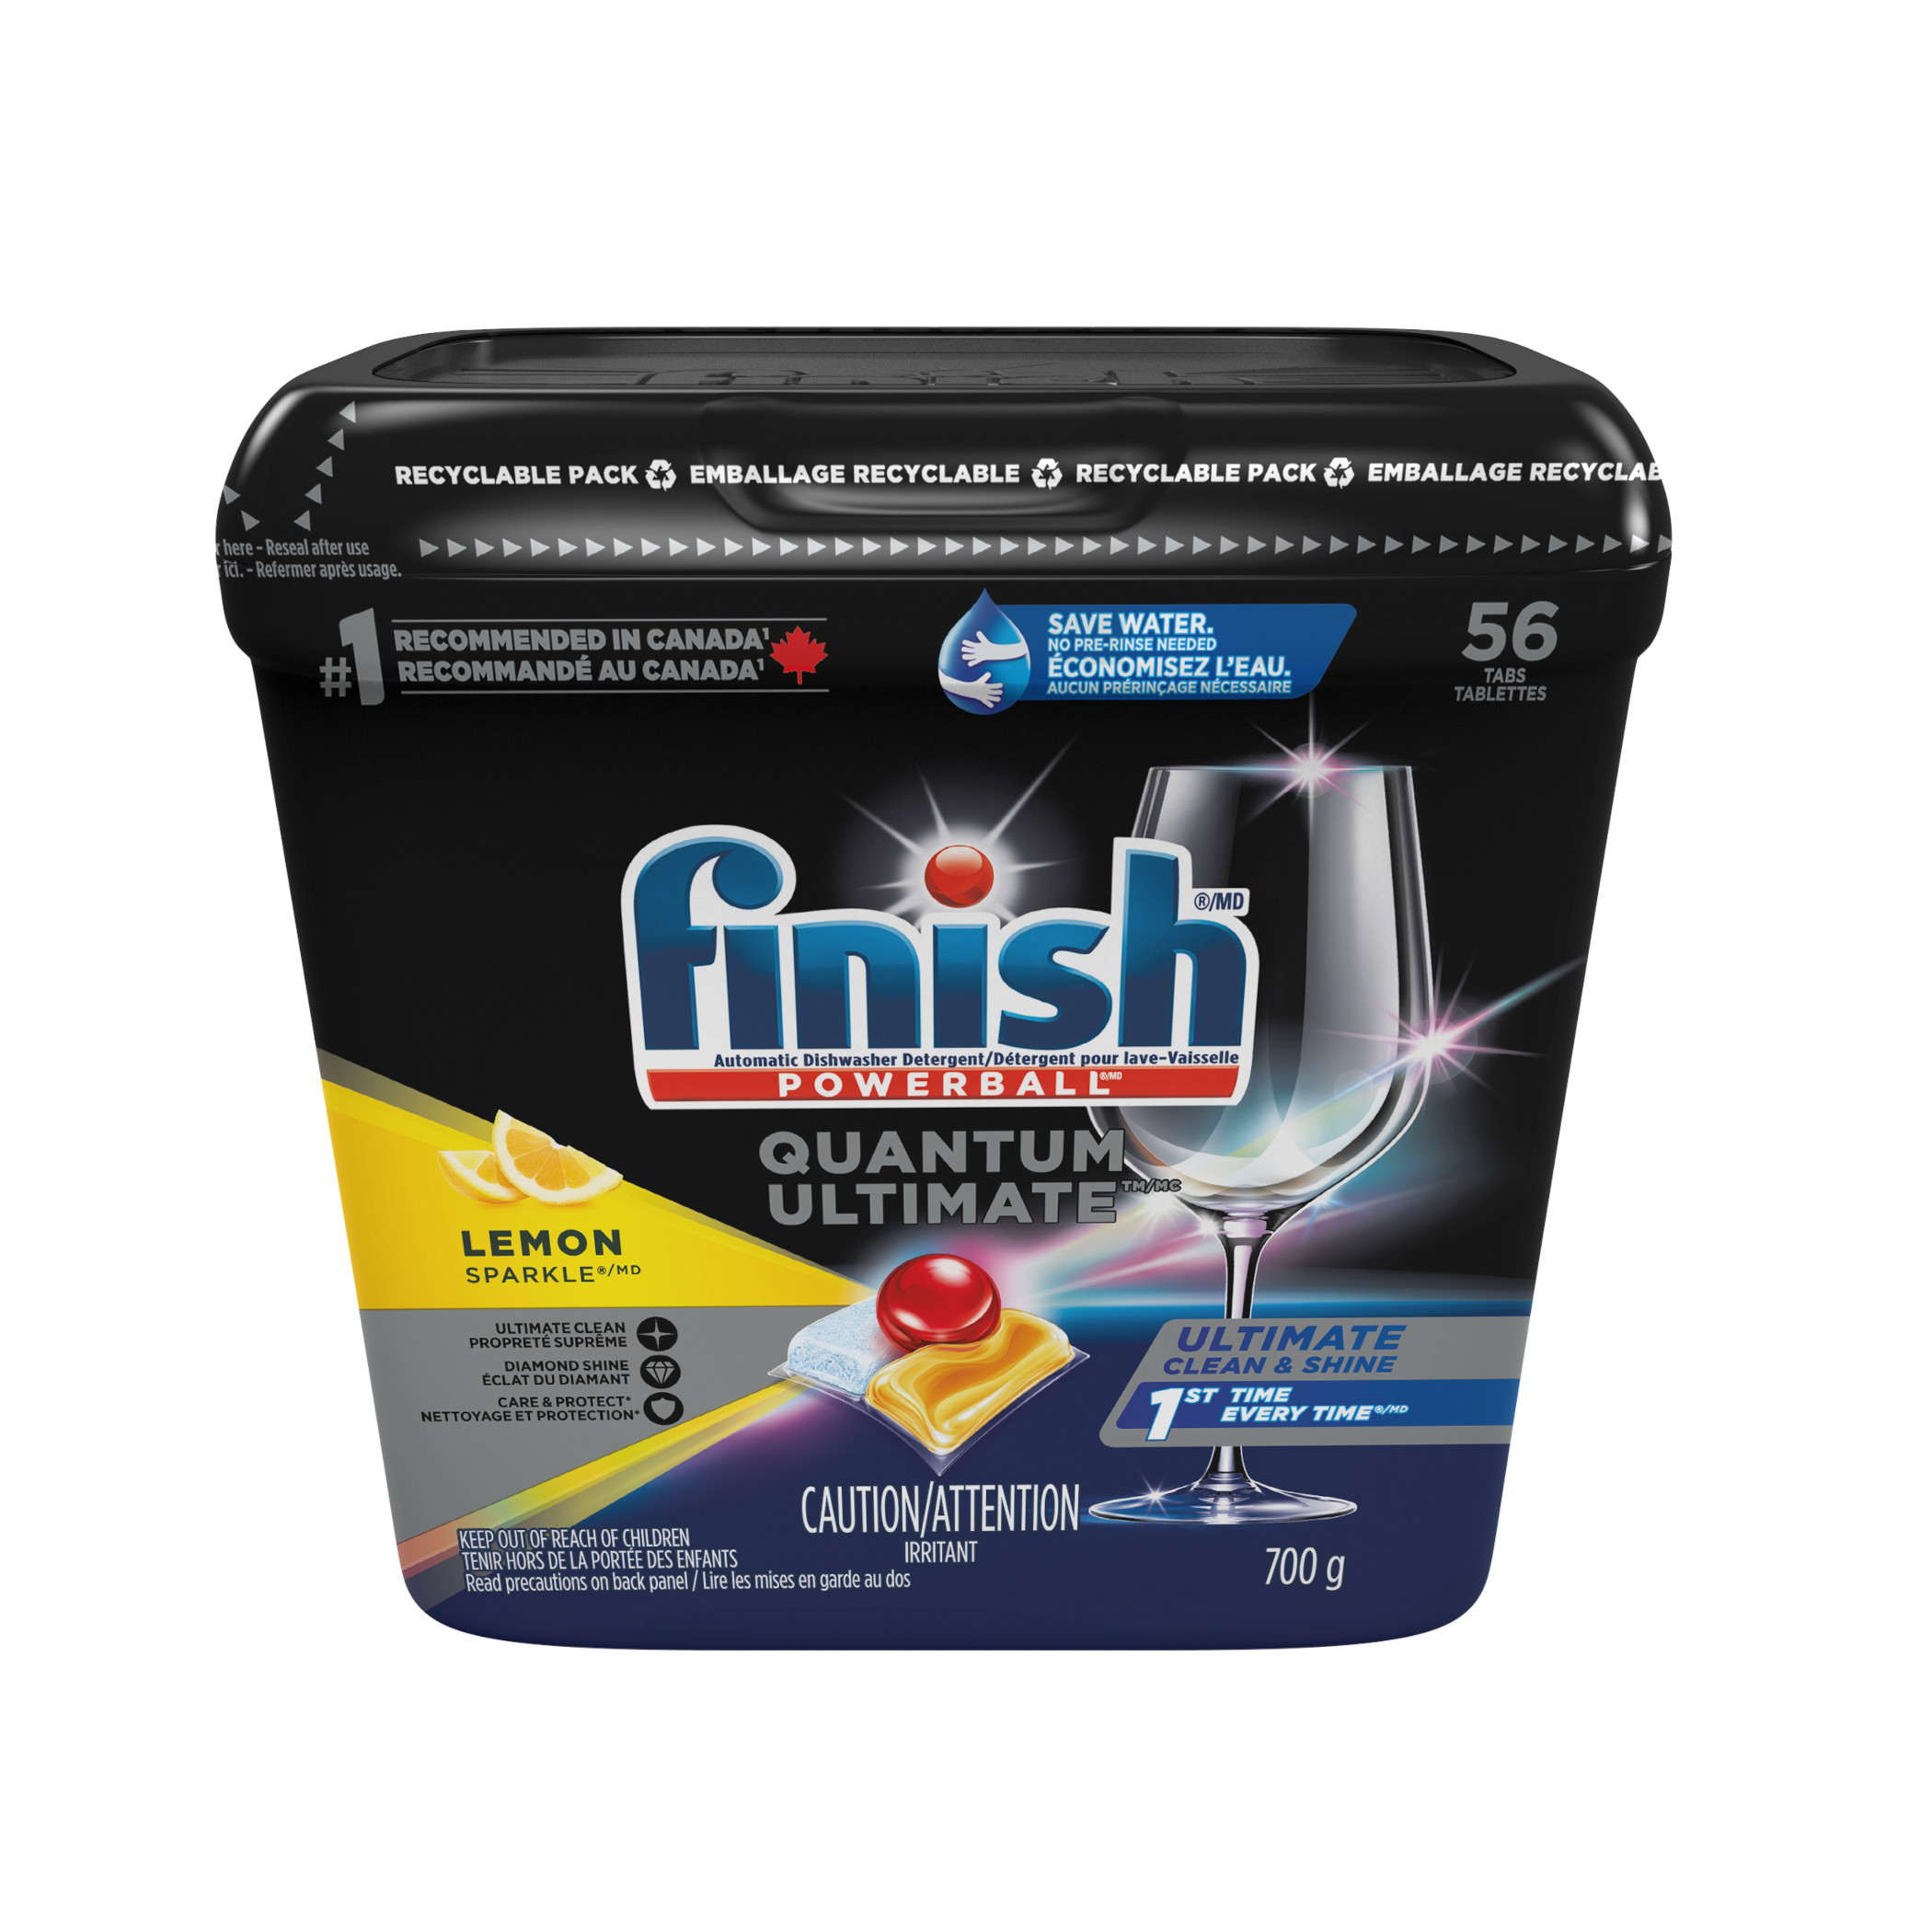 Finish Powerball Quantum Lemon Sparkle All In 1 Max Tablets 21